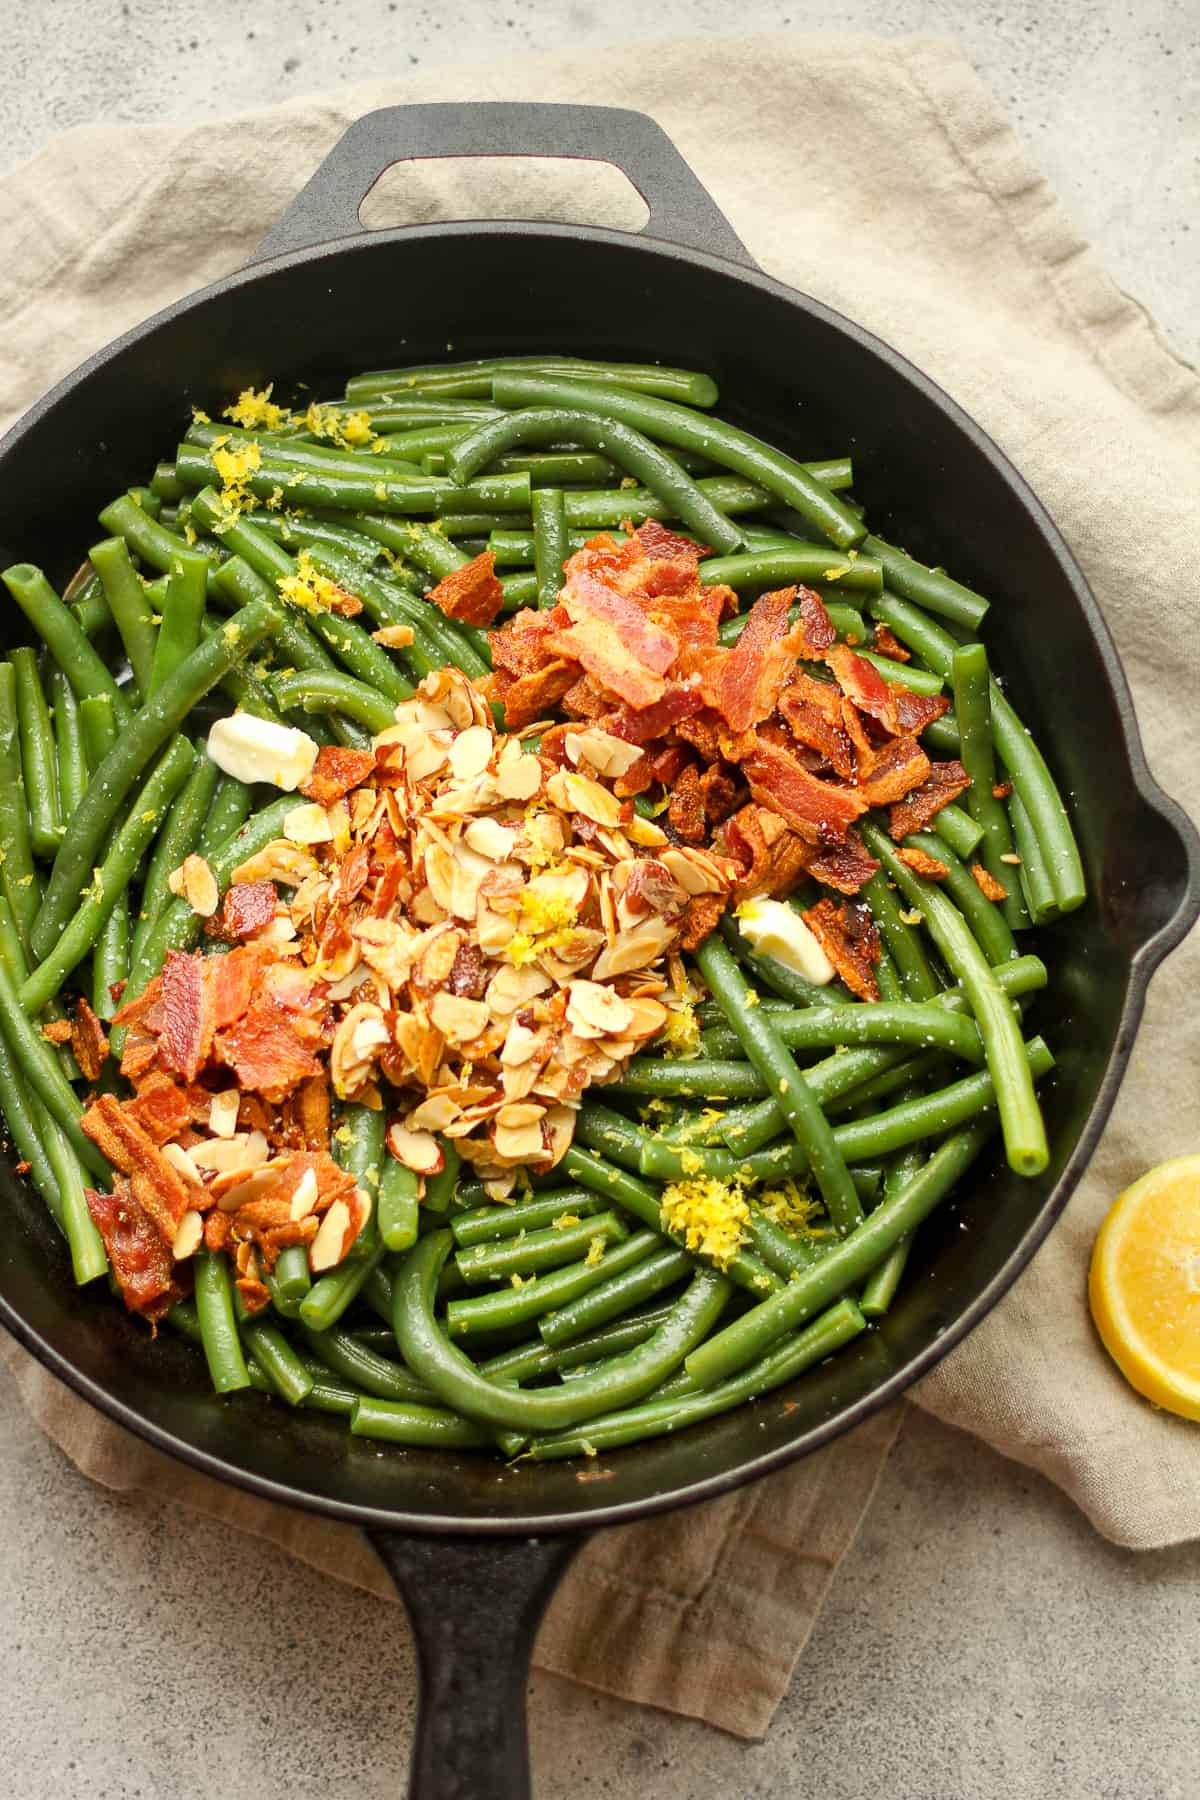 The green beans in a skillet with bacon and almonds on top.